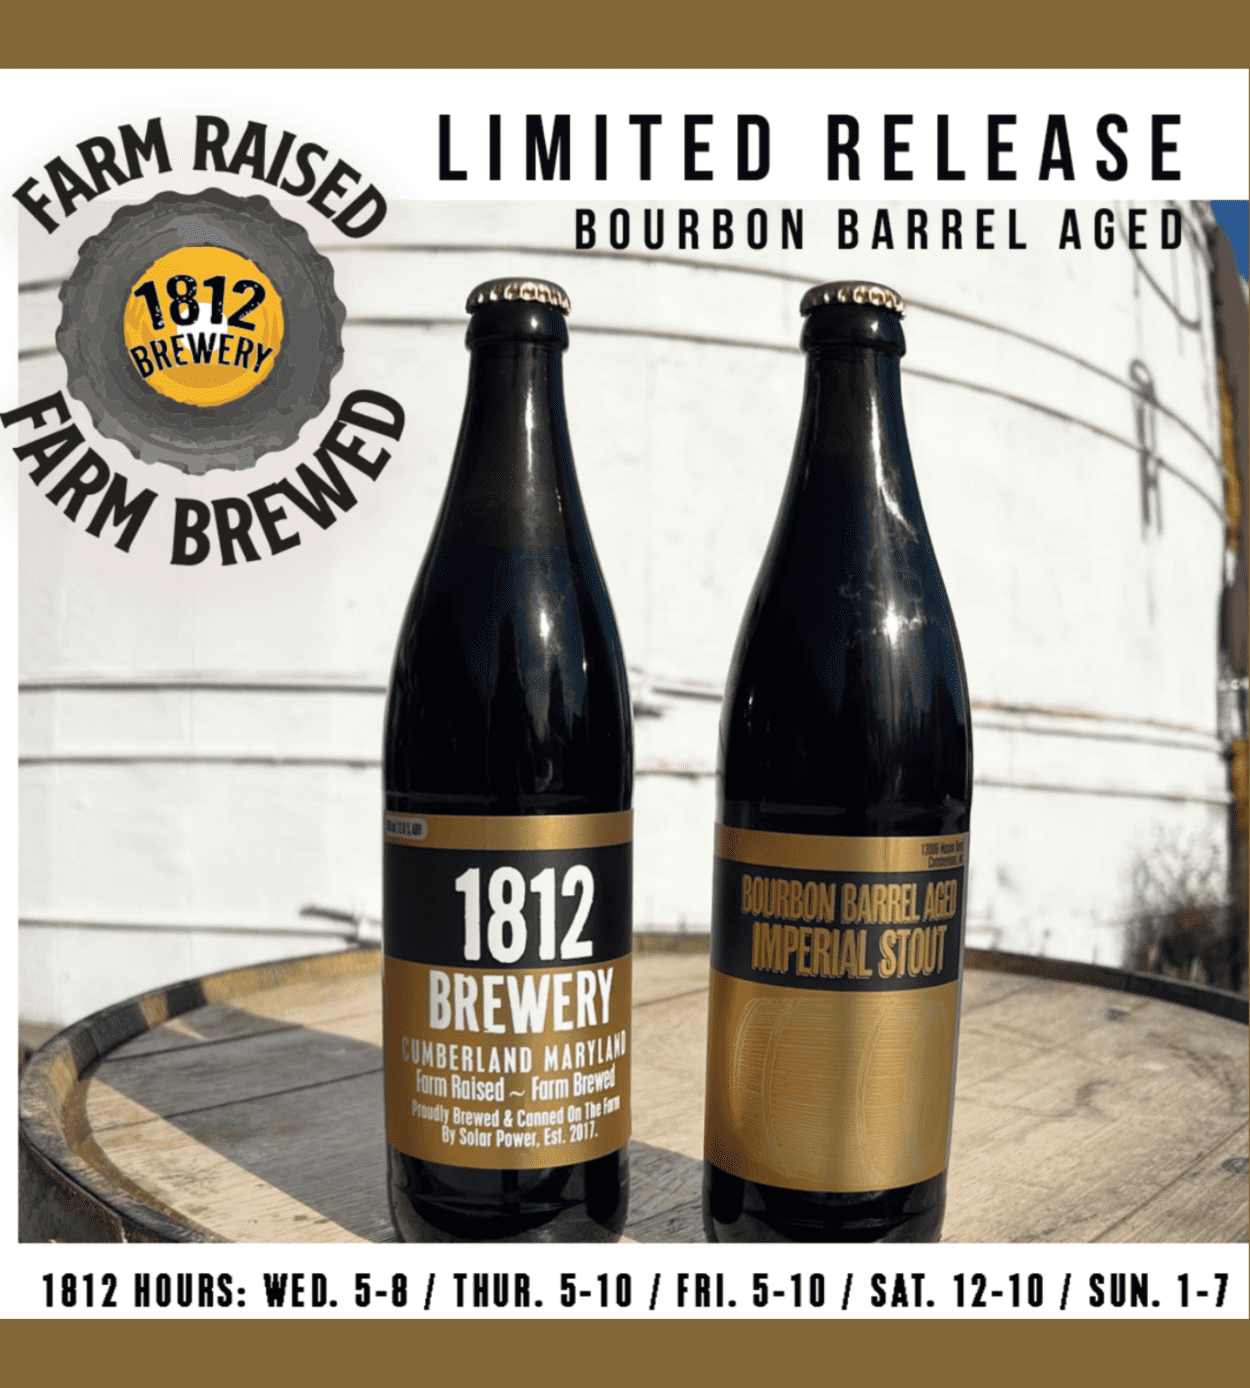 Bourbon Barrel Aged Imperial Stout Limited Release.